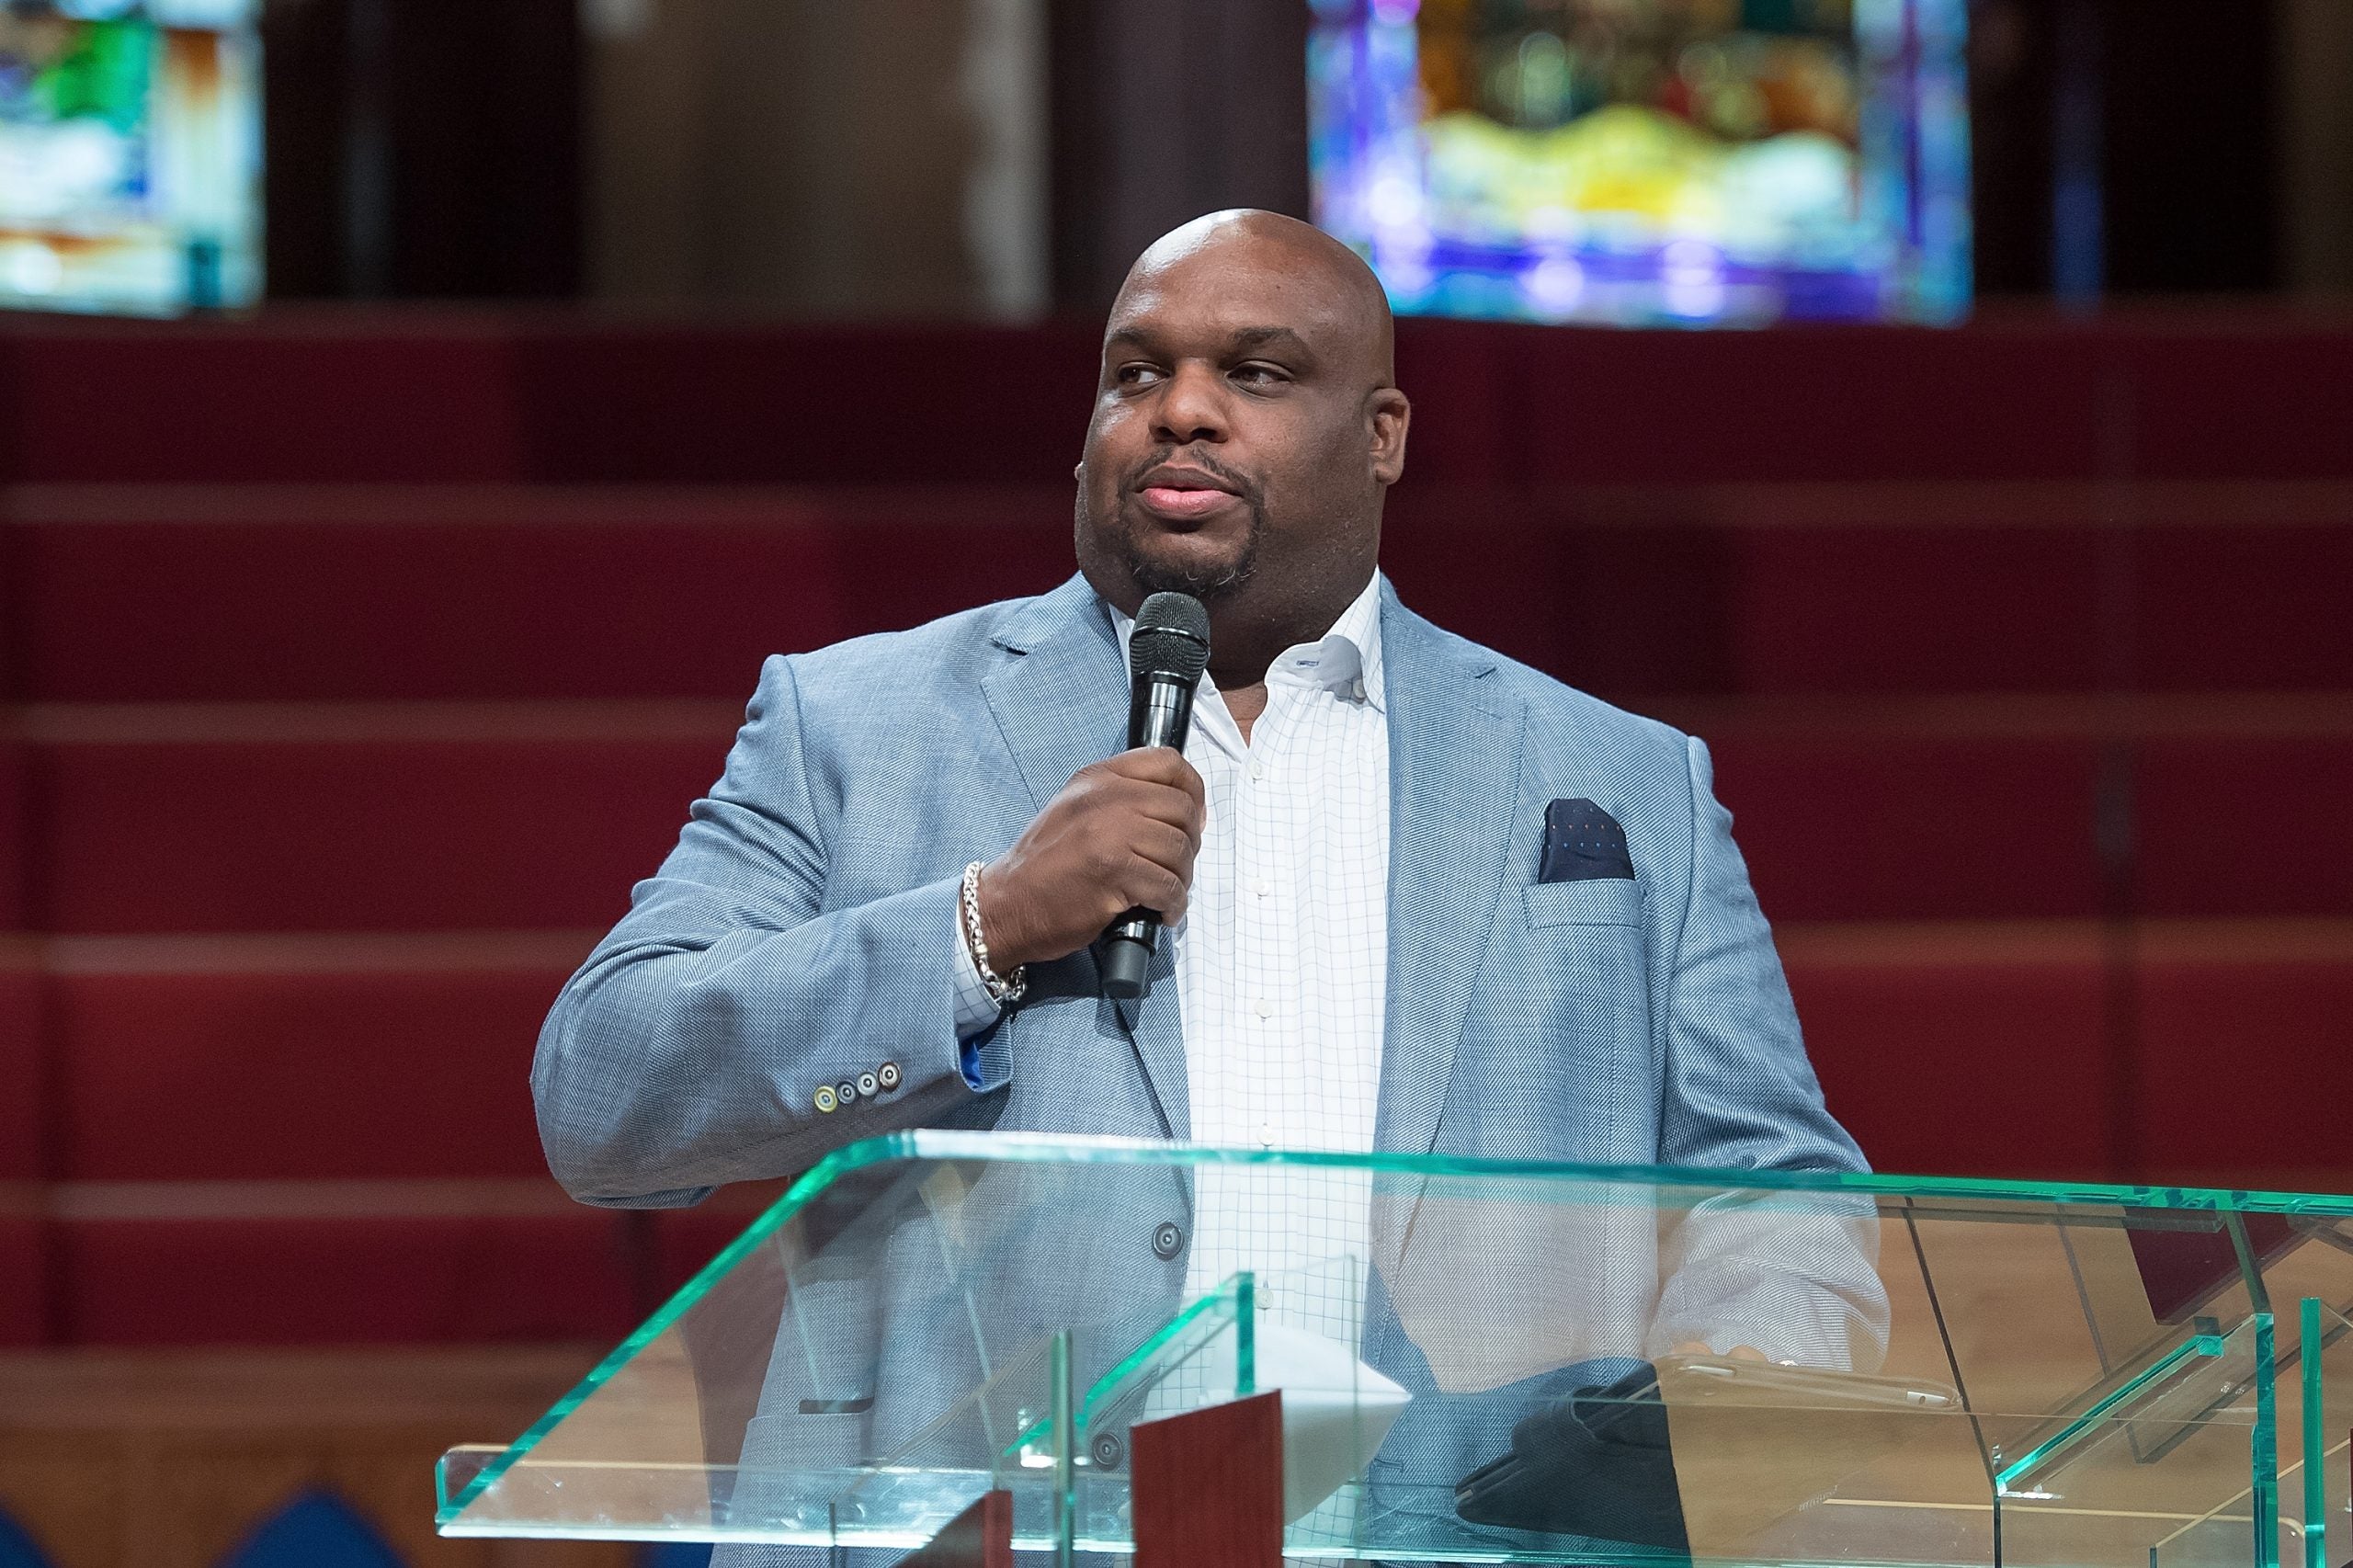 Megachurch Pastor John Gray ‘In Need Of A Miracle’ As He Battles With Dangerous Saddle Pulmonary Embolism